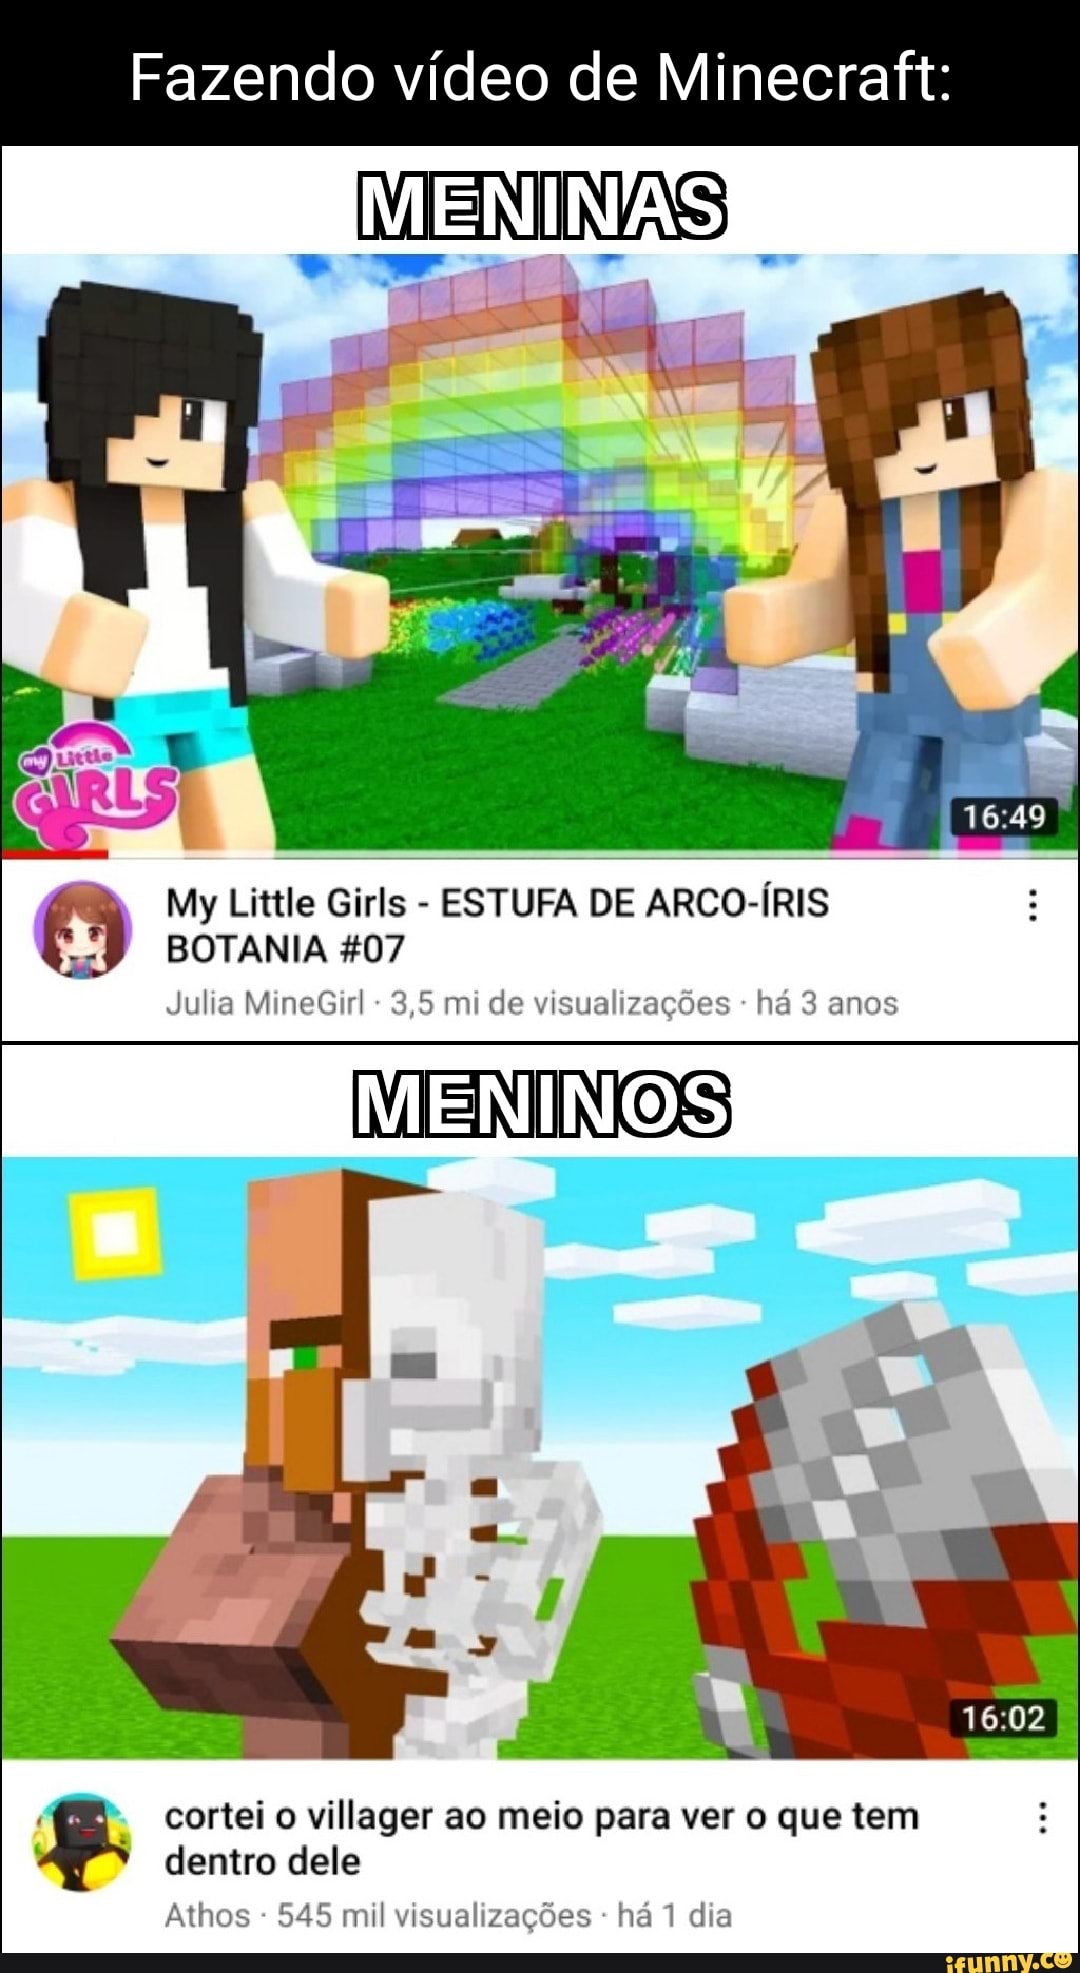 Minegirl memes. Best Collection of funny Minegirl pictures on iFunny Brazil